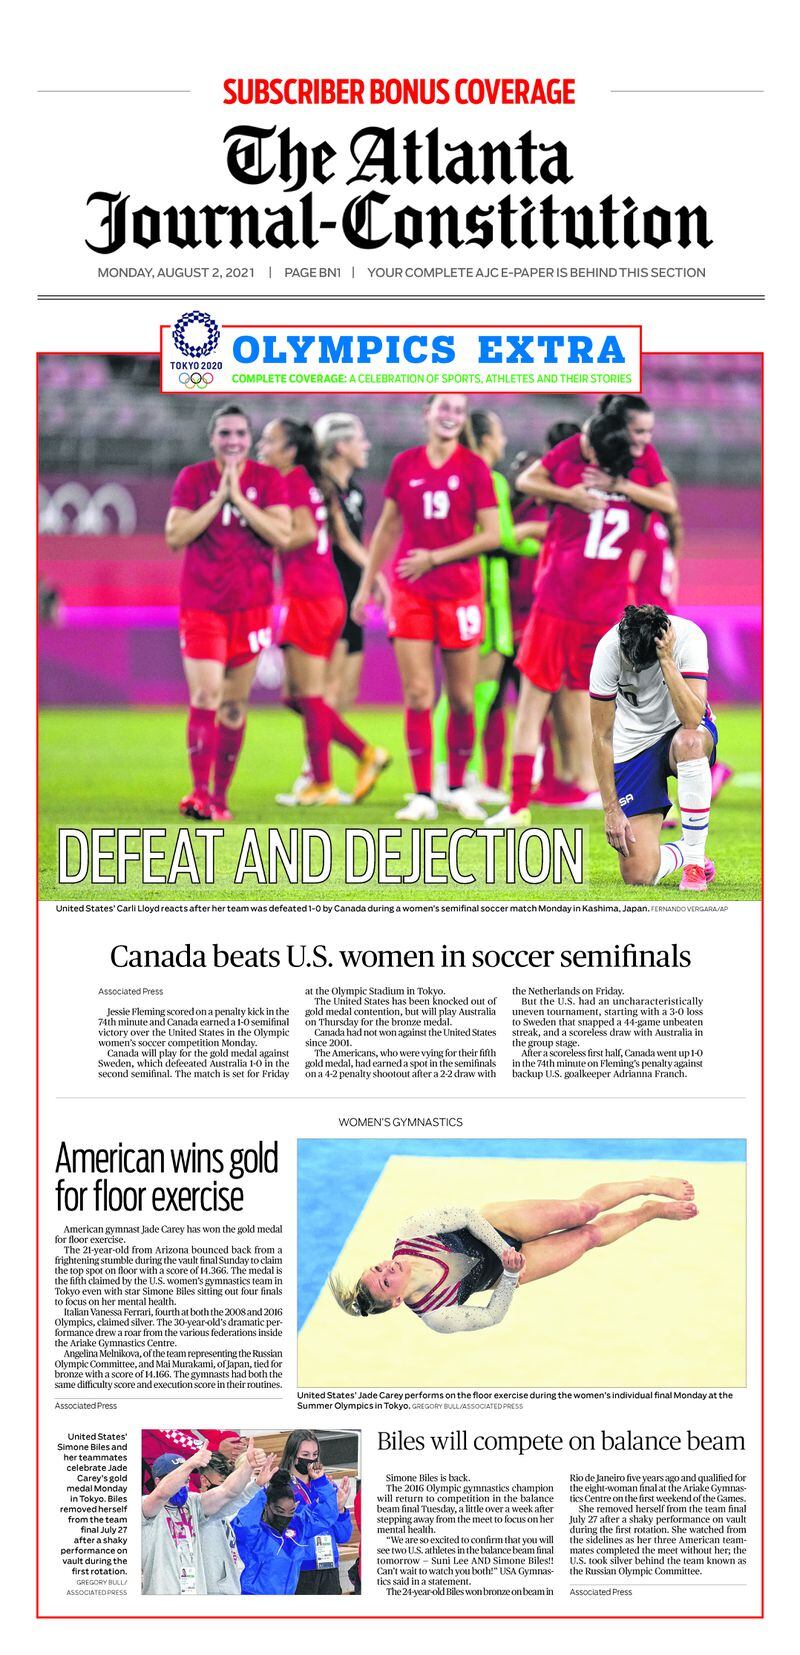 Tokyo Olympic Extra in today’s ePaper: A loss for U.S. women in soccer